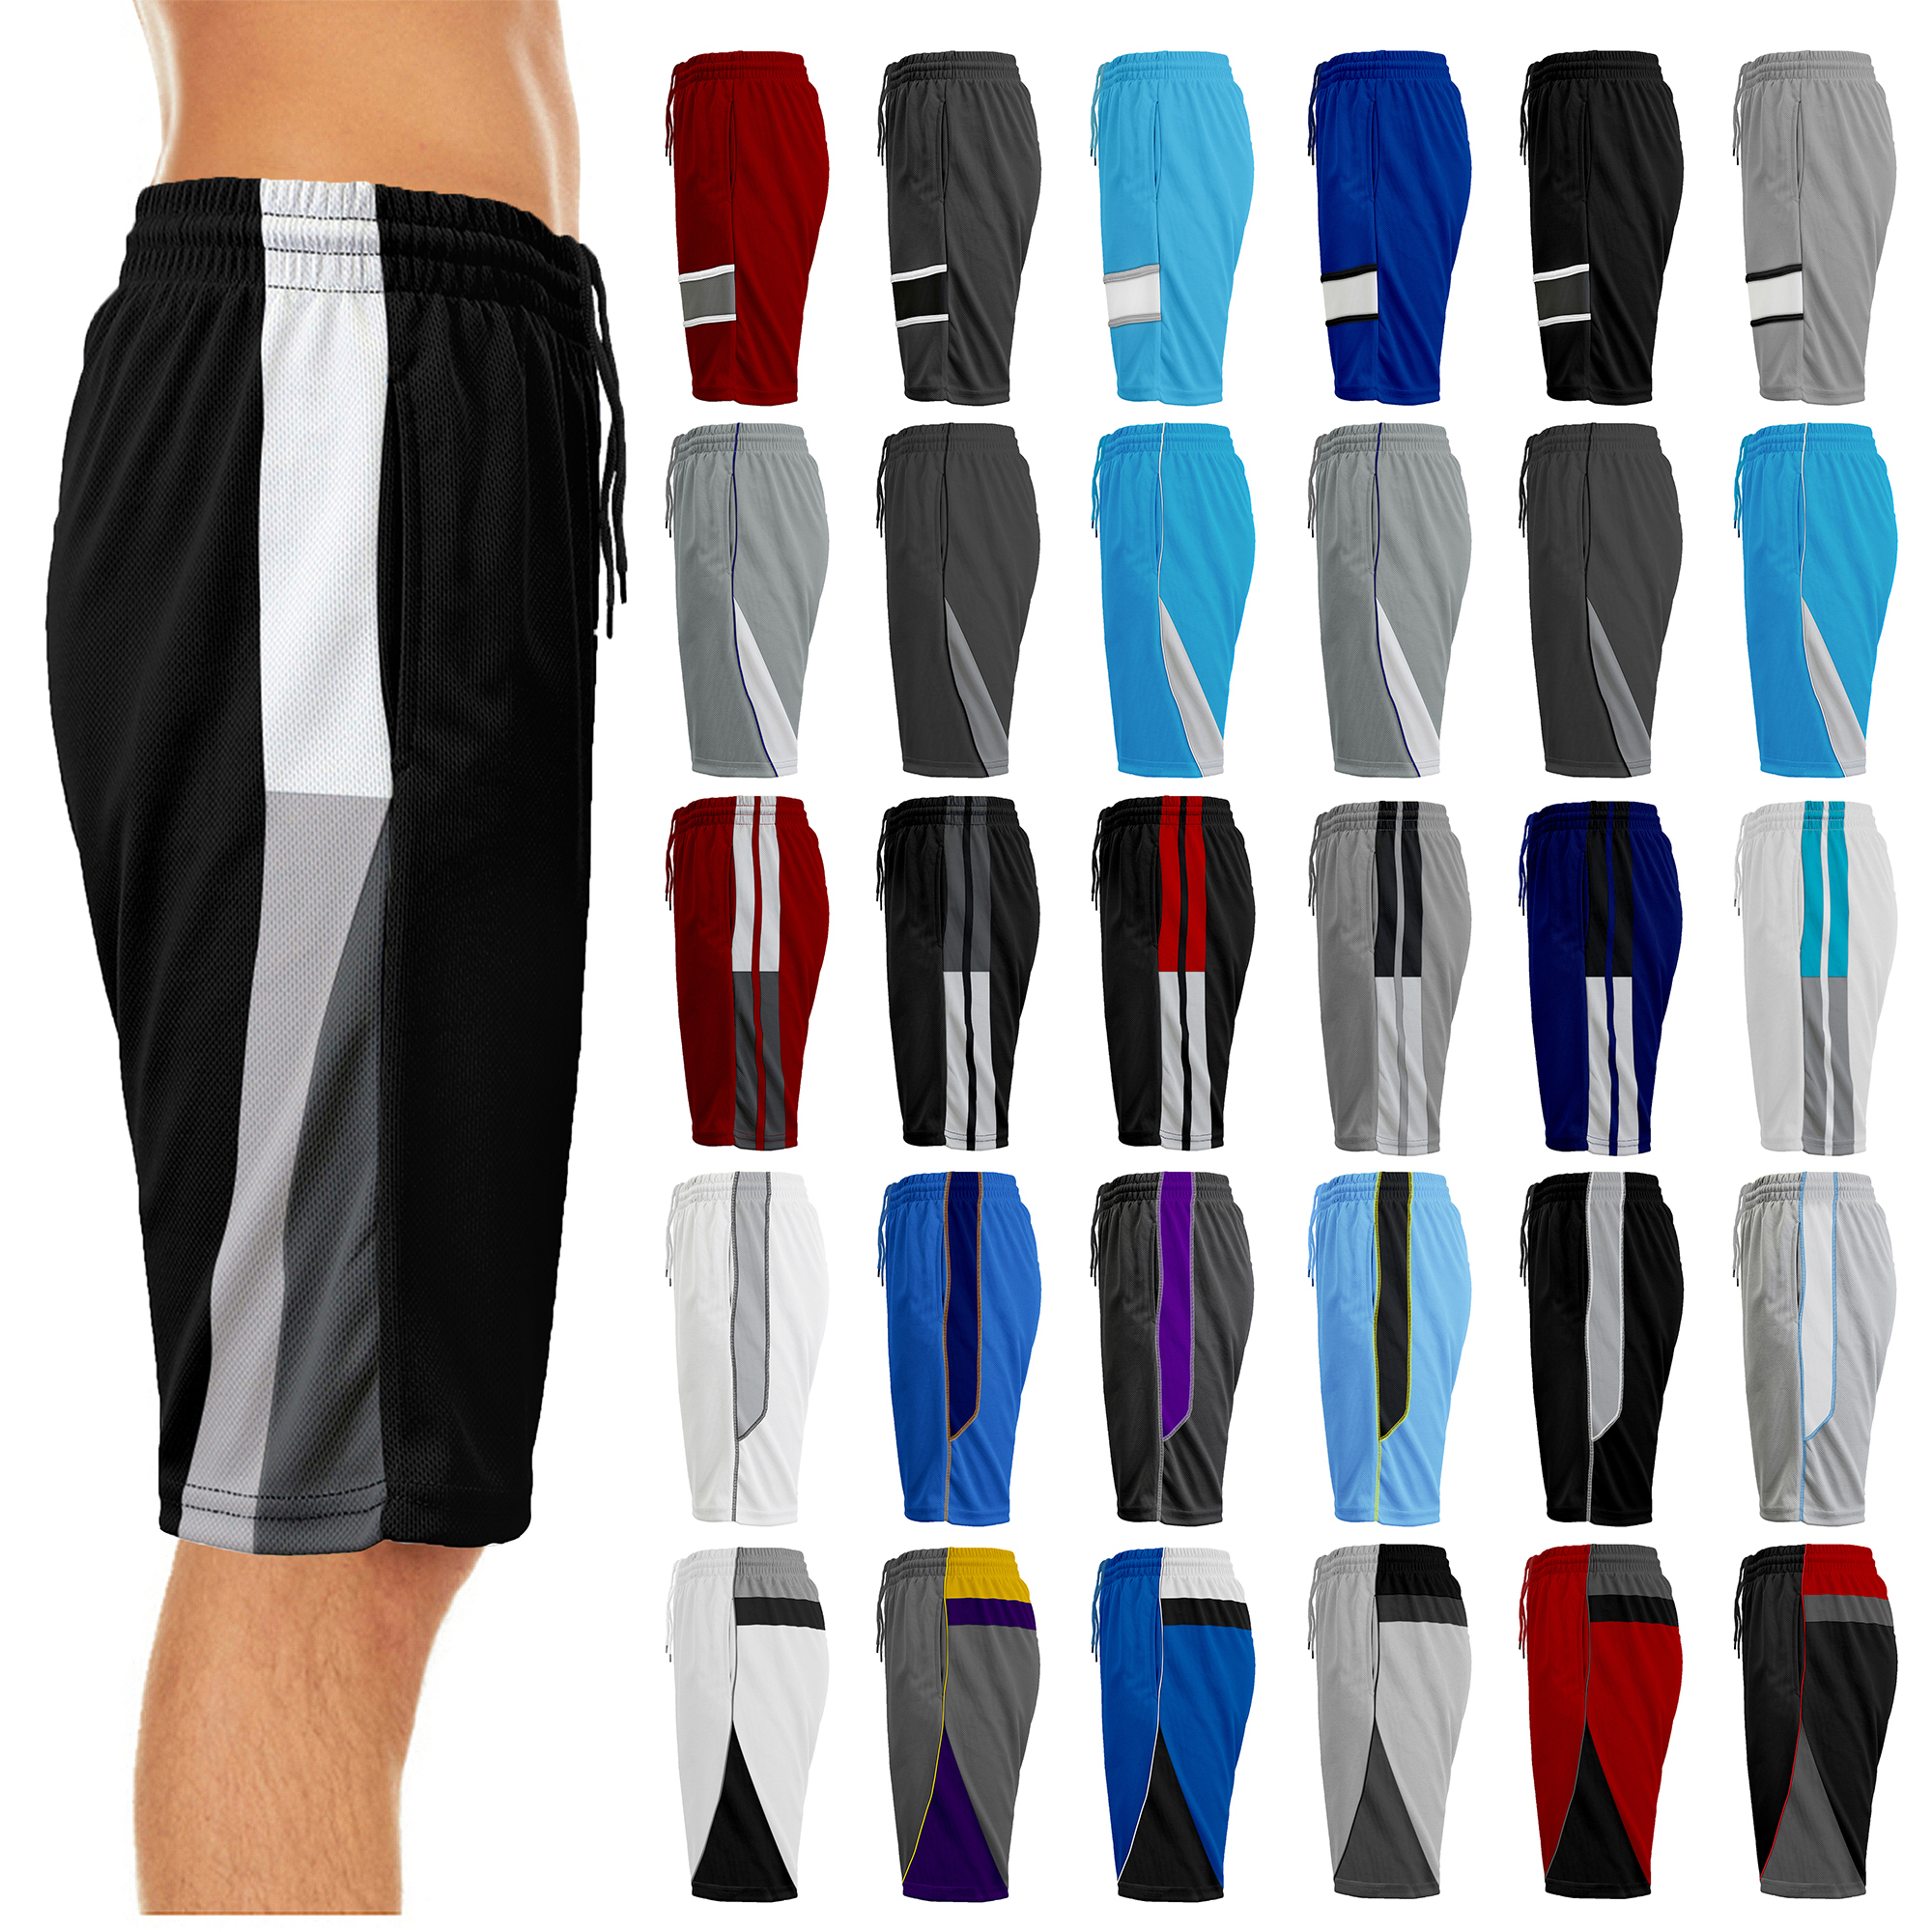 5-Pack: Men's Active Summer Athletic Mesh Moisture-Wicking Performance Shorts - Large